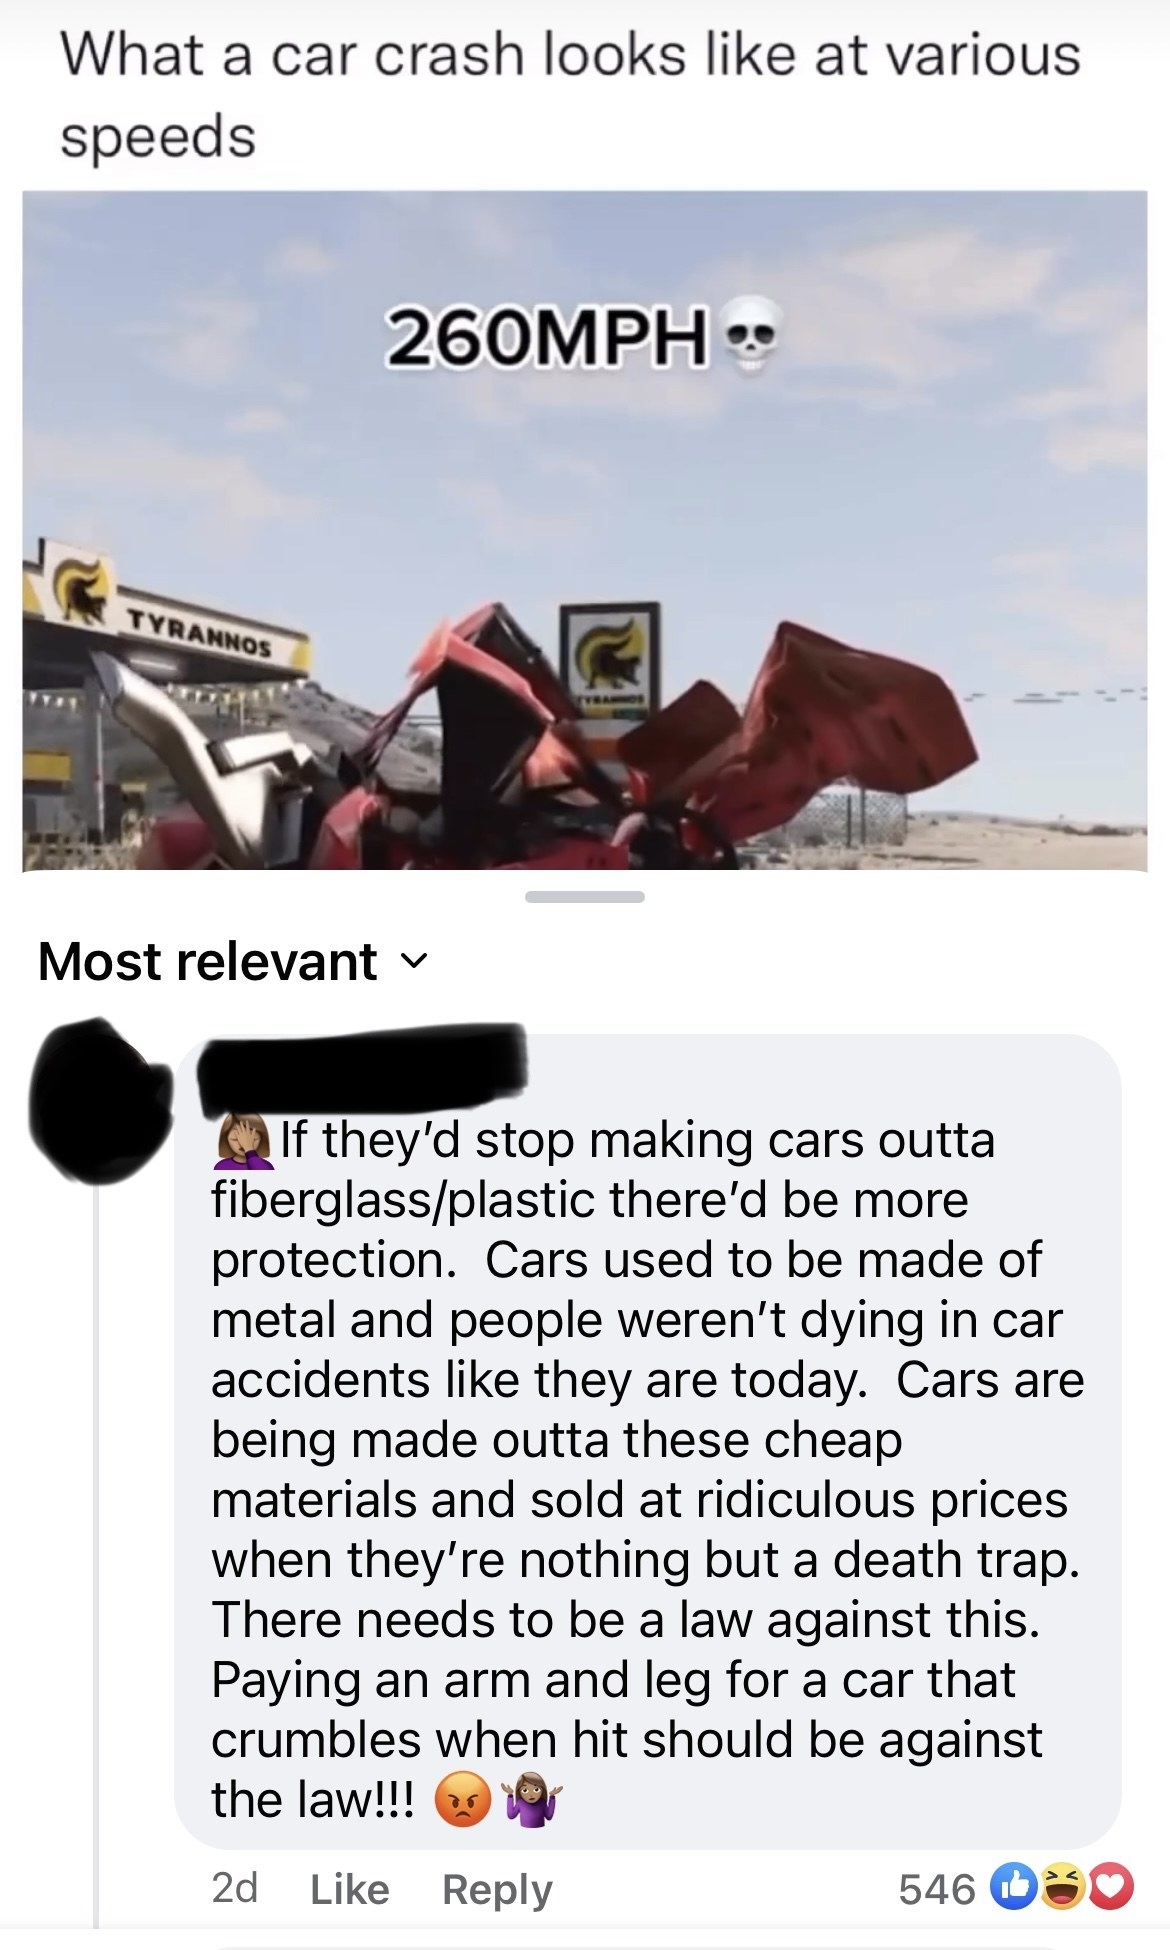 &quot;Cars used to be made of metal and people weren&#x27;t dying in car accidents like they are today.&quot;